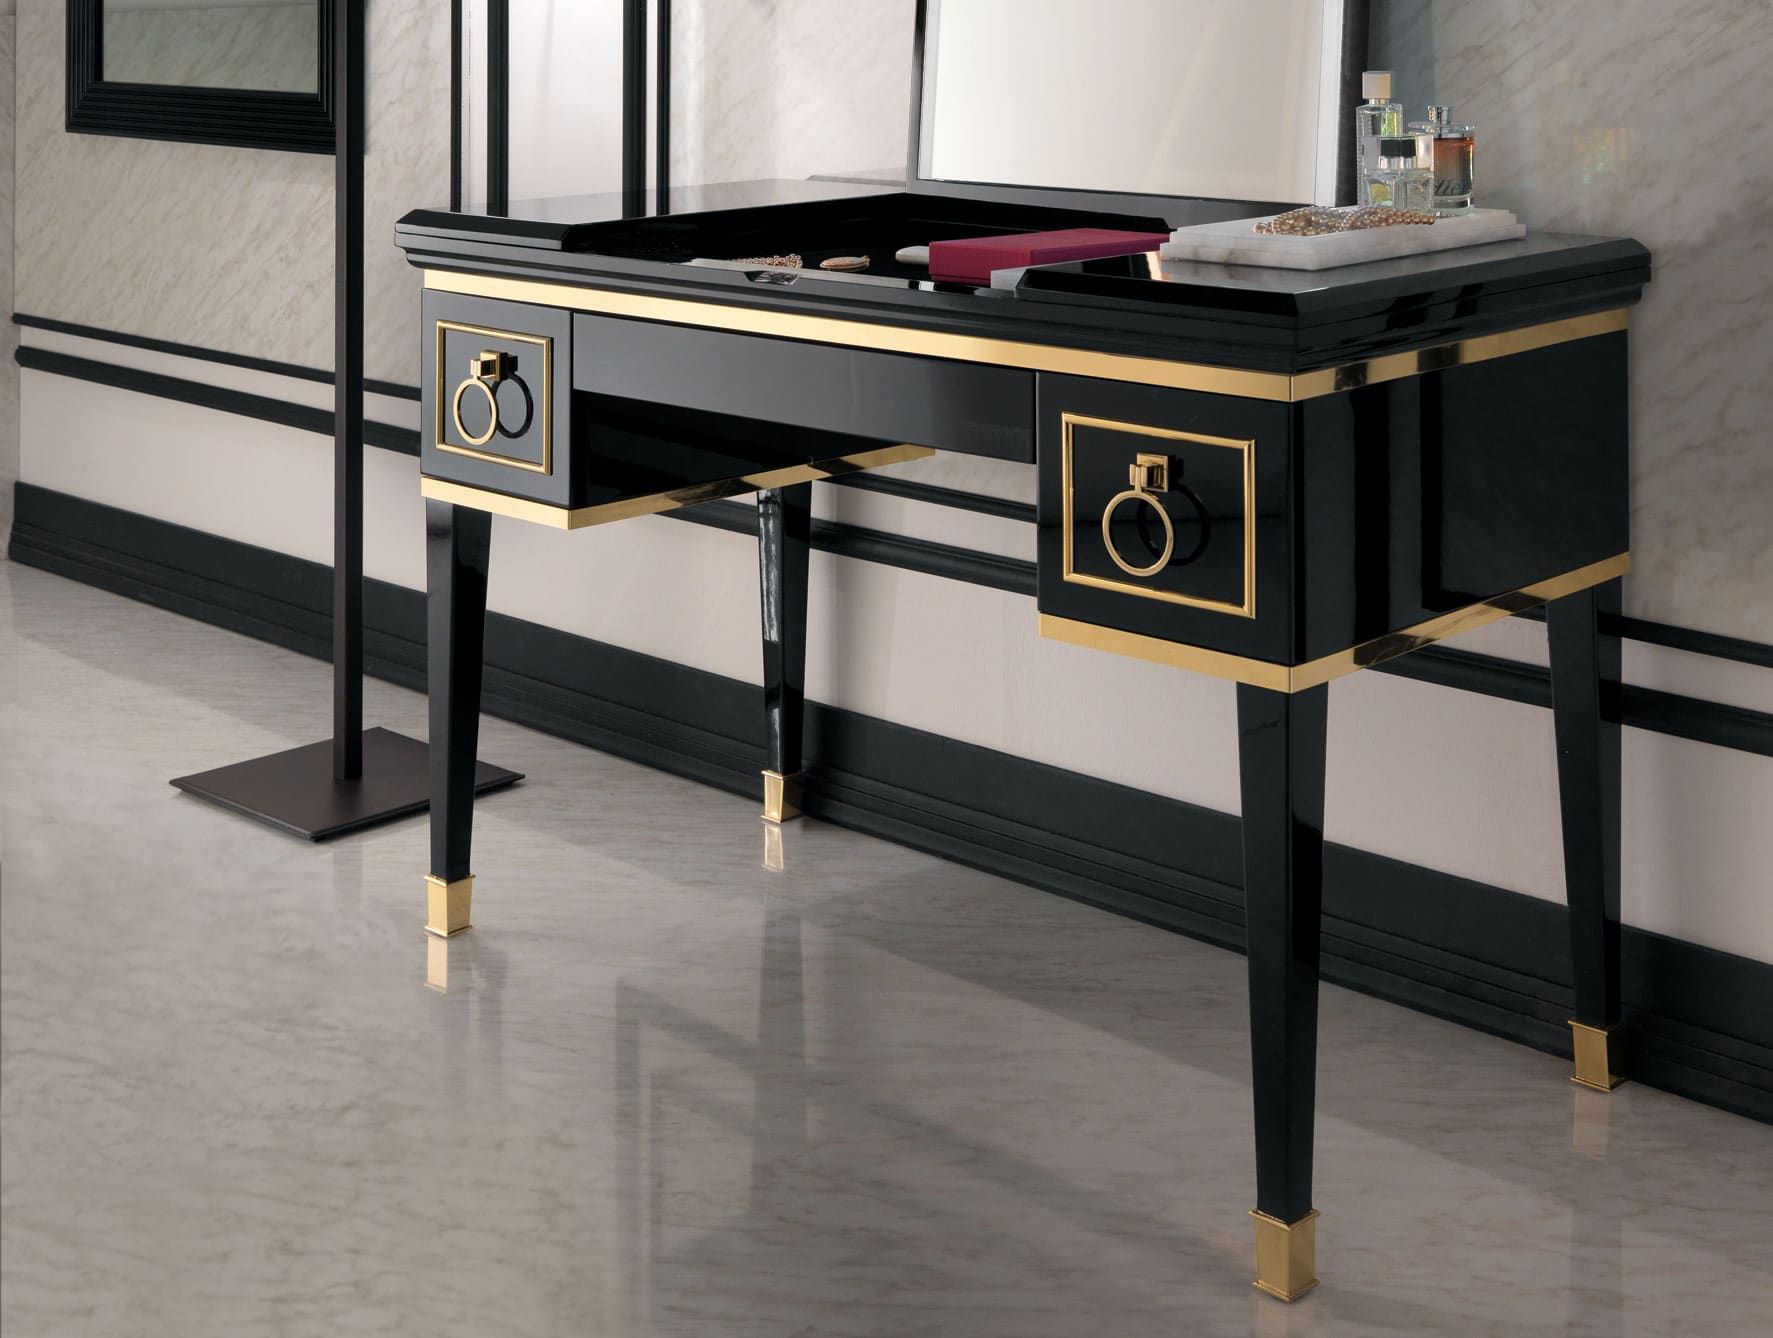 Lutetia classic luxury vanity table with black lacquered wood